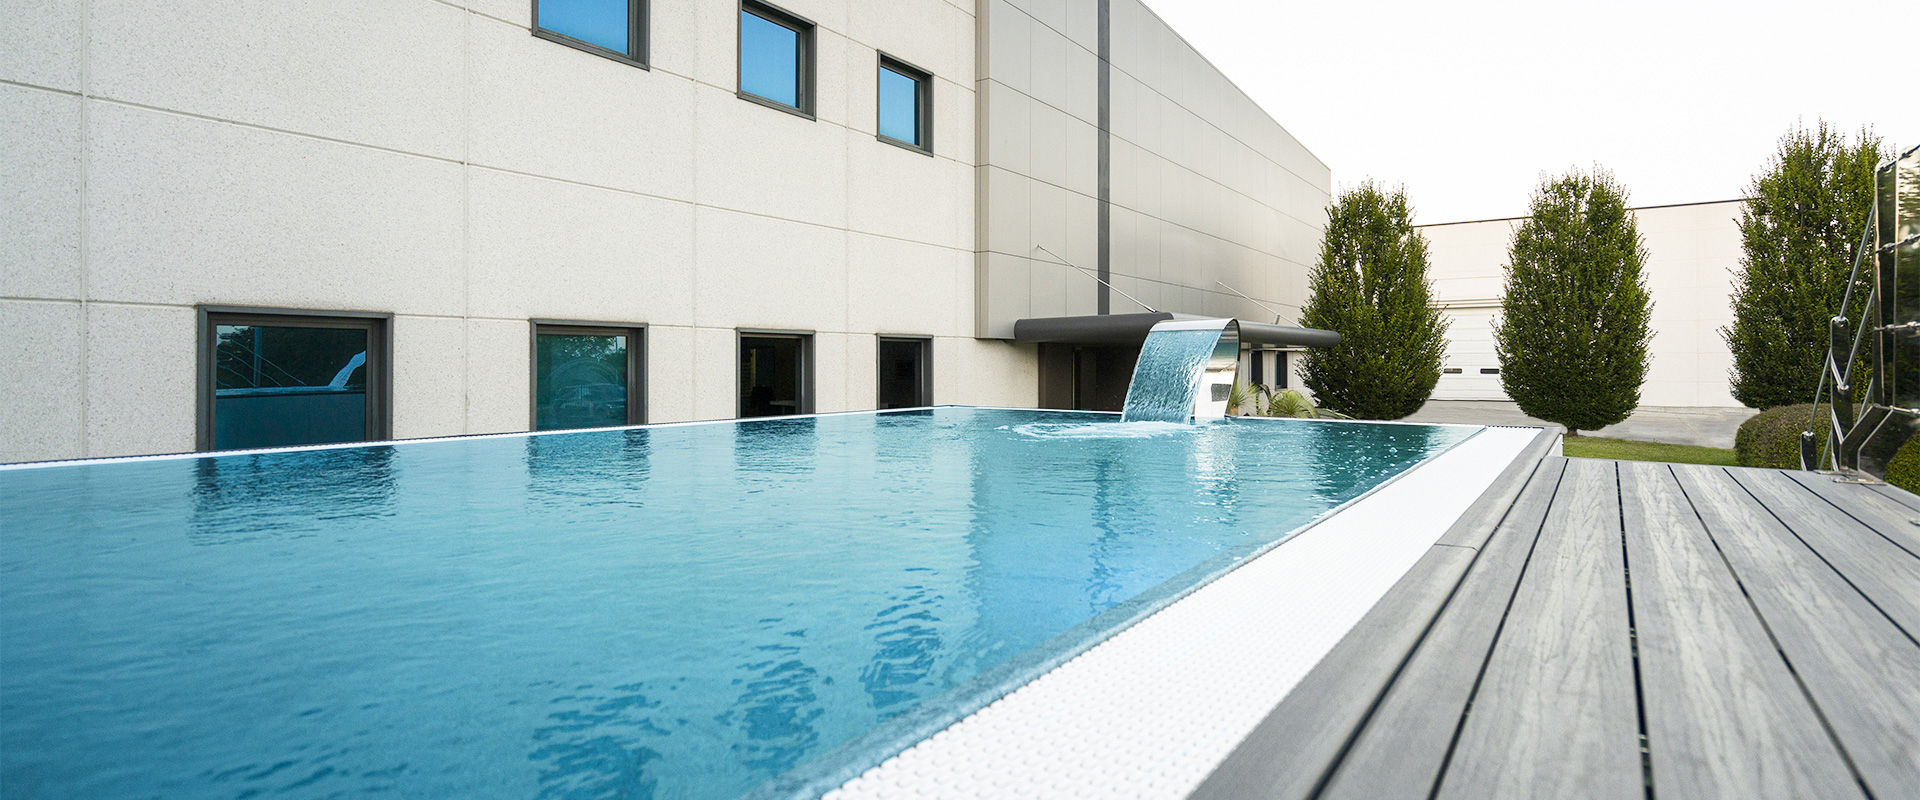 Request more informations | Above-ground swimming pools | Request more informations about out above-ground swimming